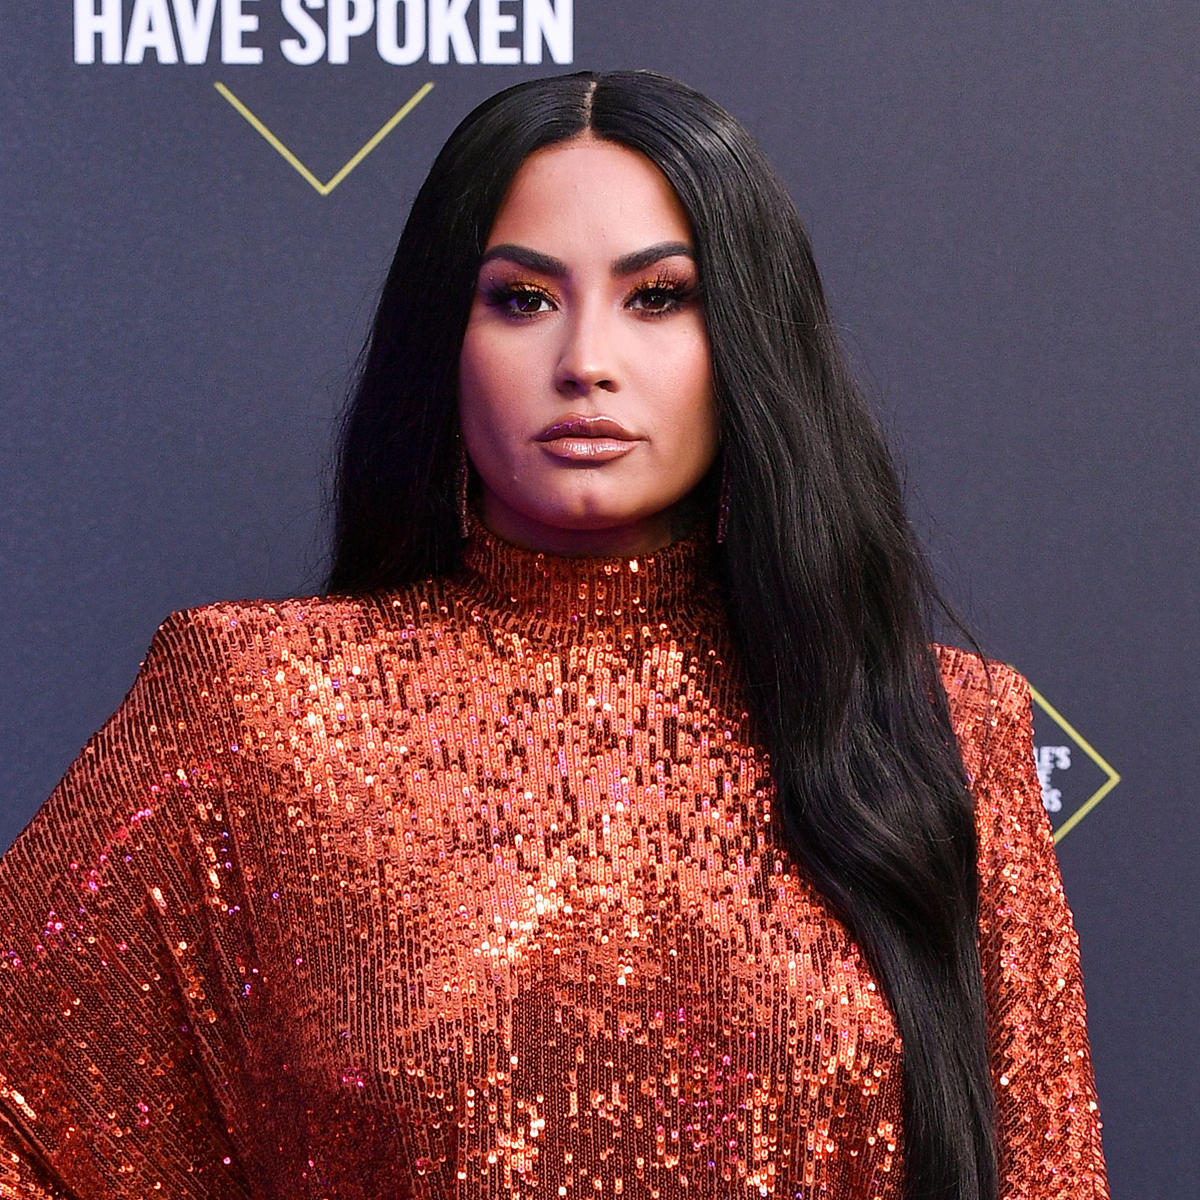 Demi Lovato suffered 3 strokes and a heart attack after overdosing